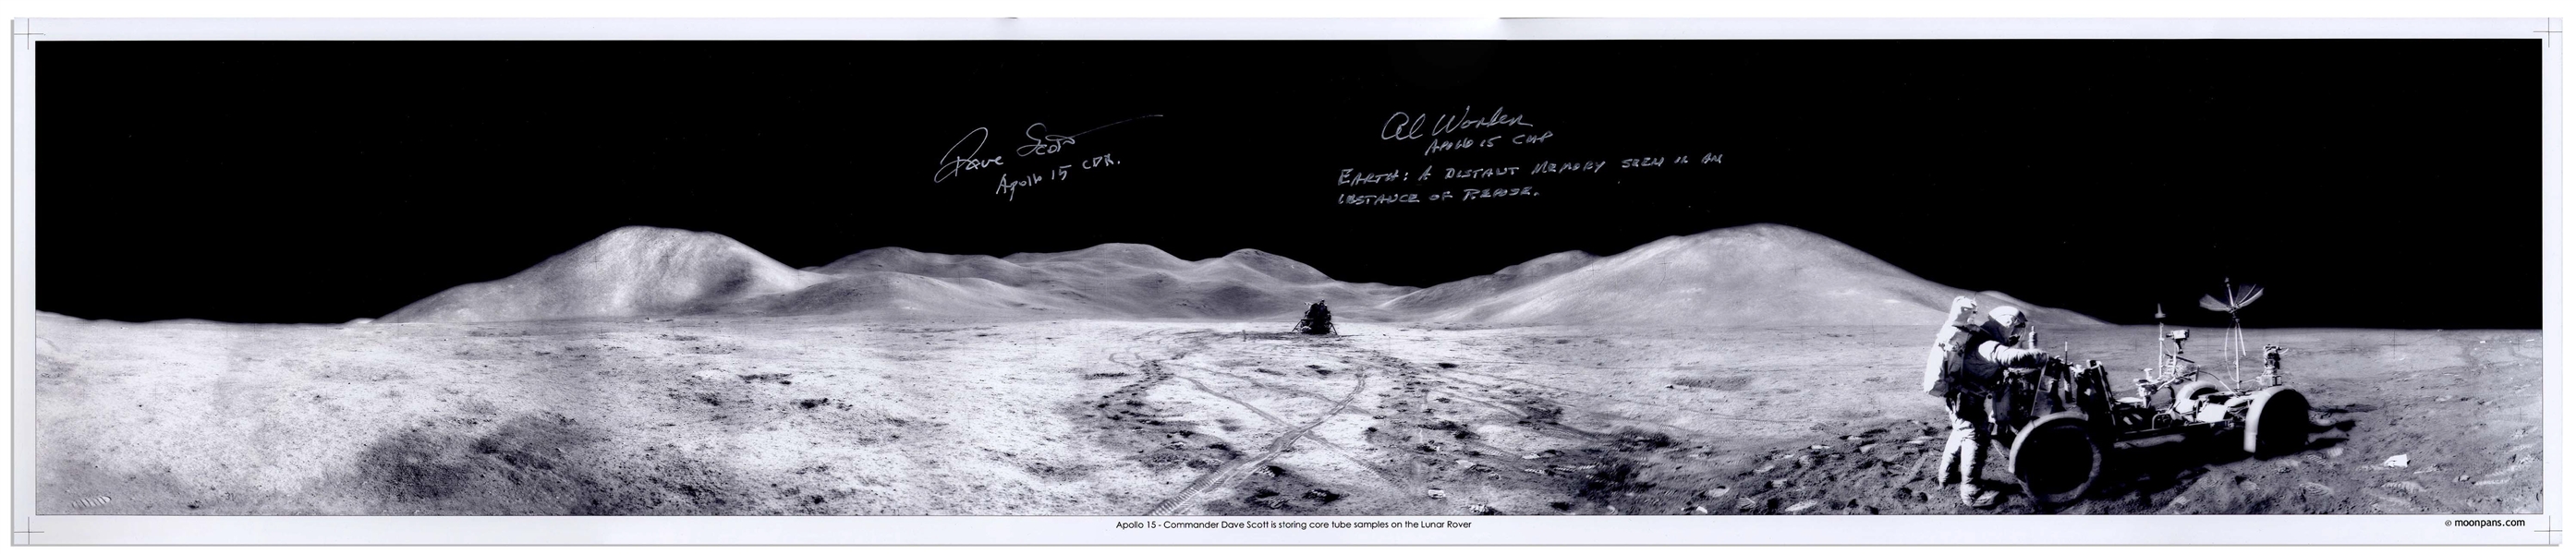 Al Worden & Dave Scott Signed Panoramic 40.5 x 8.5 Photo of the Moon's Surface -- Worden Additionally Writes His Famous Quote About Seeing Earth From the Moon